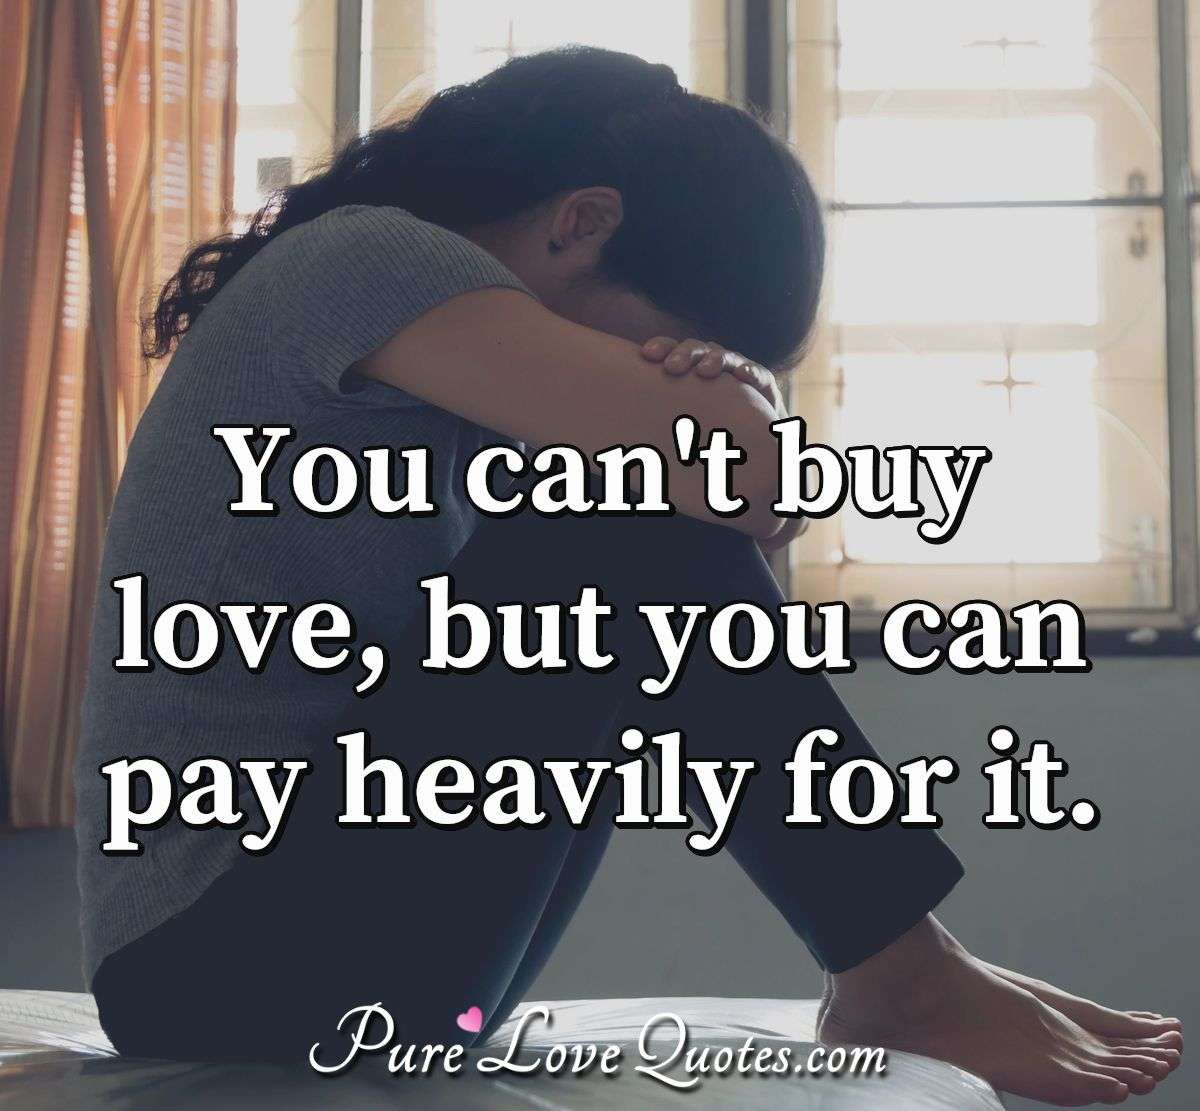 You can't buy love, but you can pay heavily for it. - Anonymous